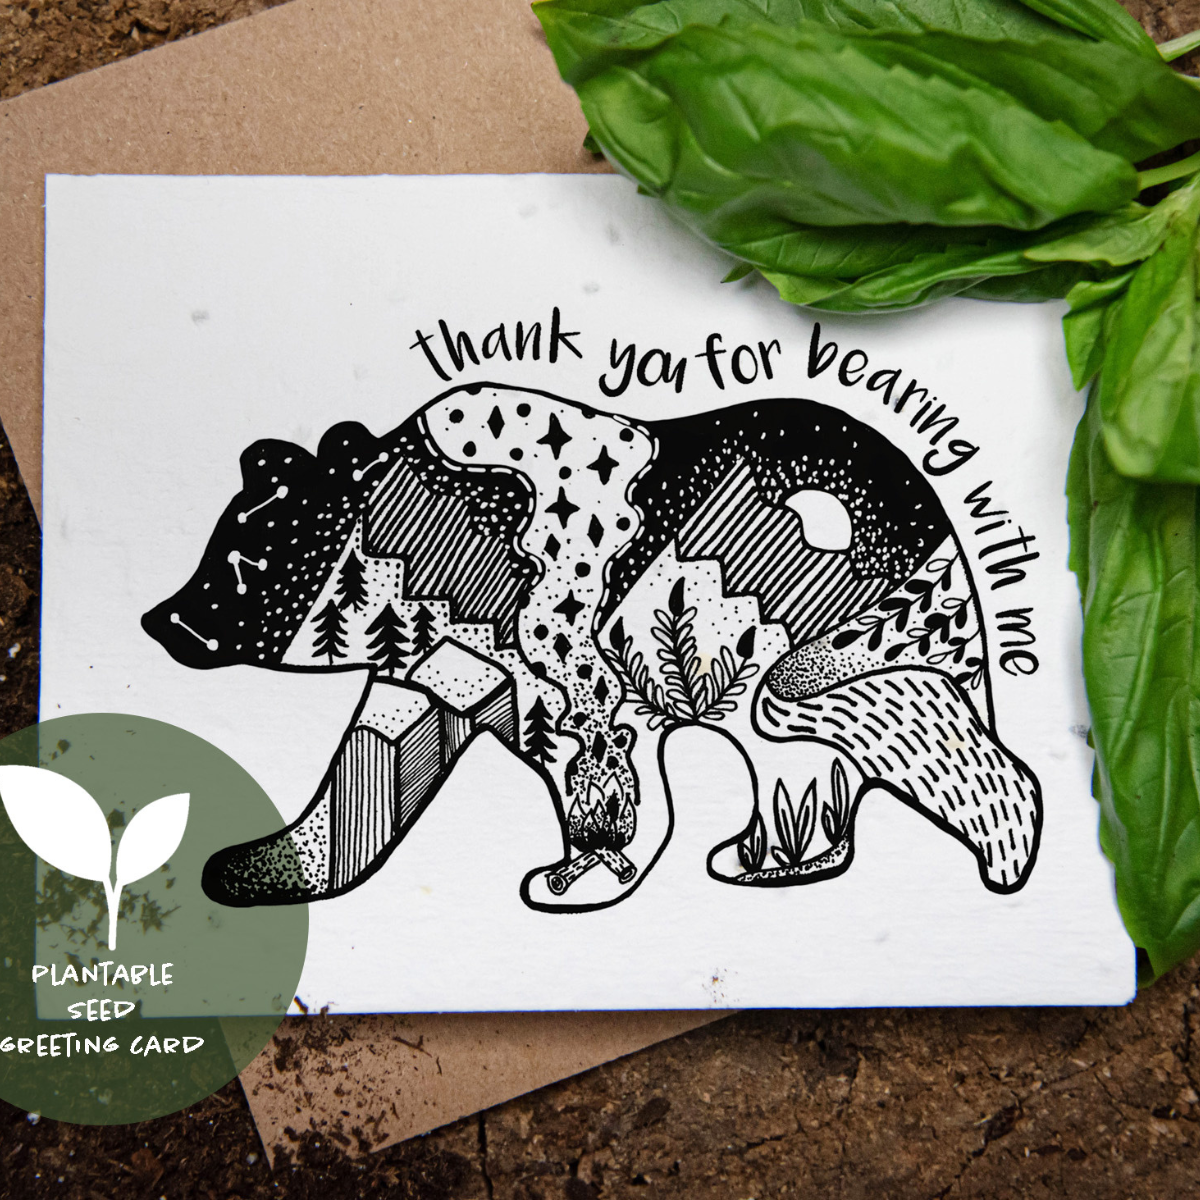 Plantable Greeting Card - Thank You For Bearing With Me by Mountain Mornings